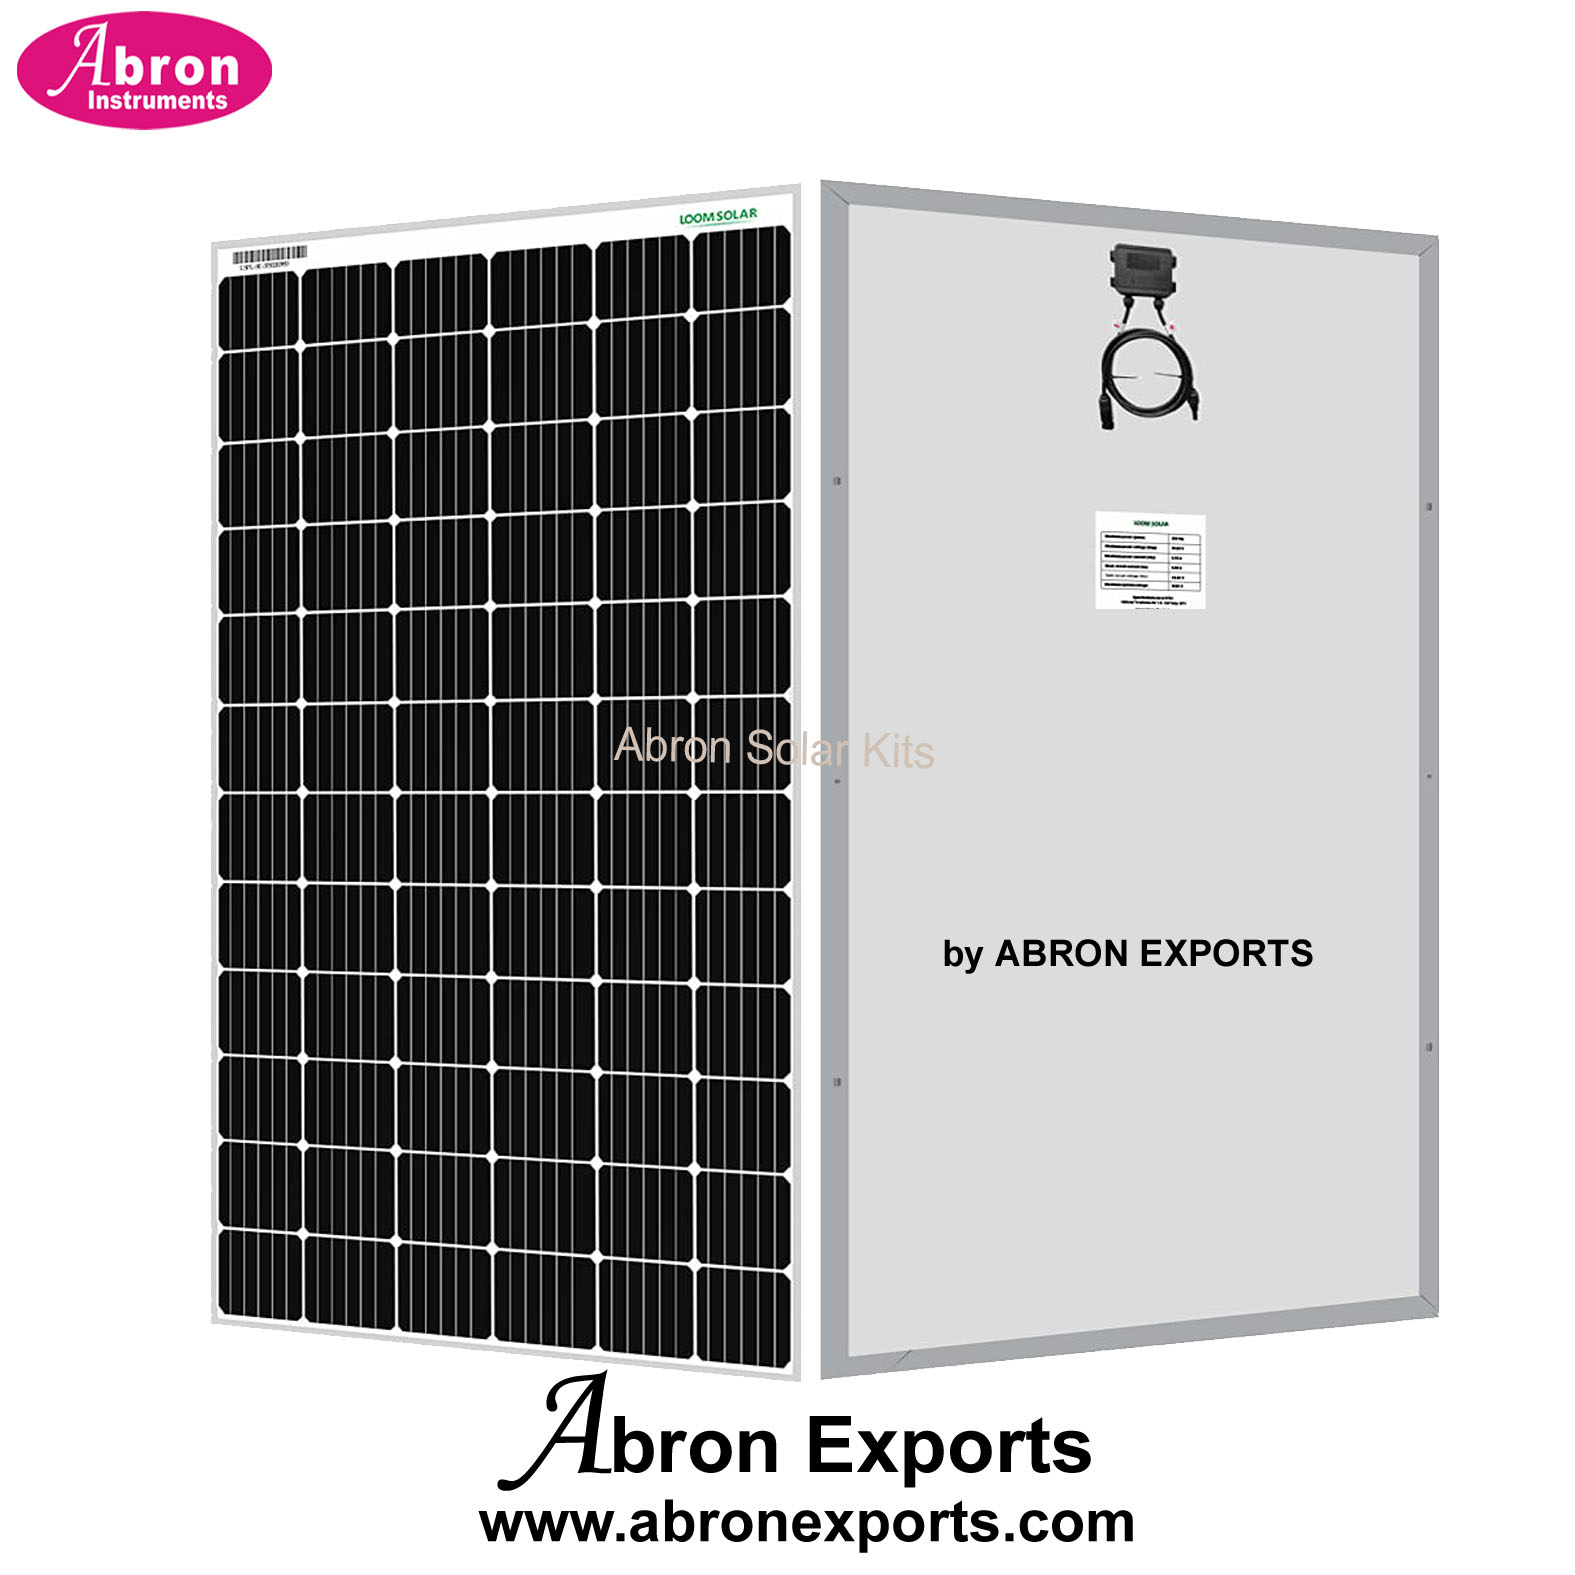 Solar Panel 12V 100mA with wire AE-1373D12